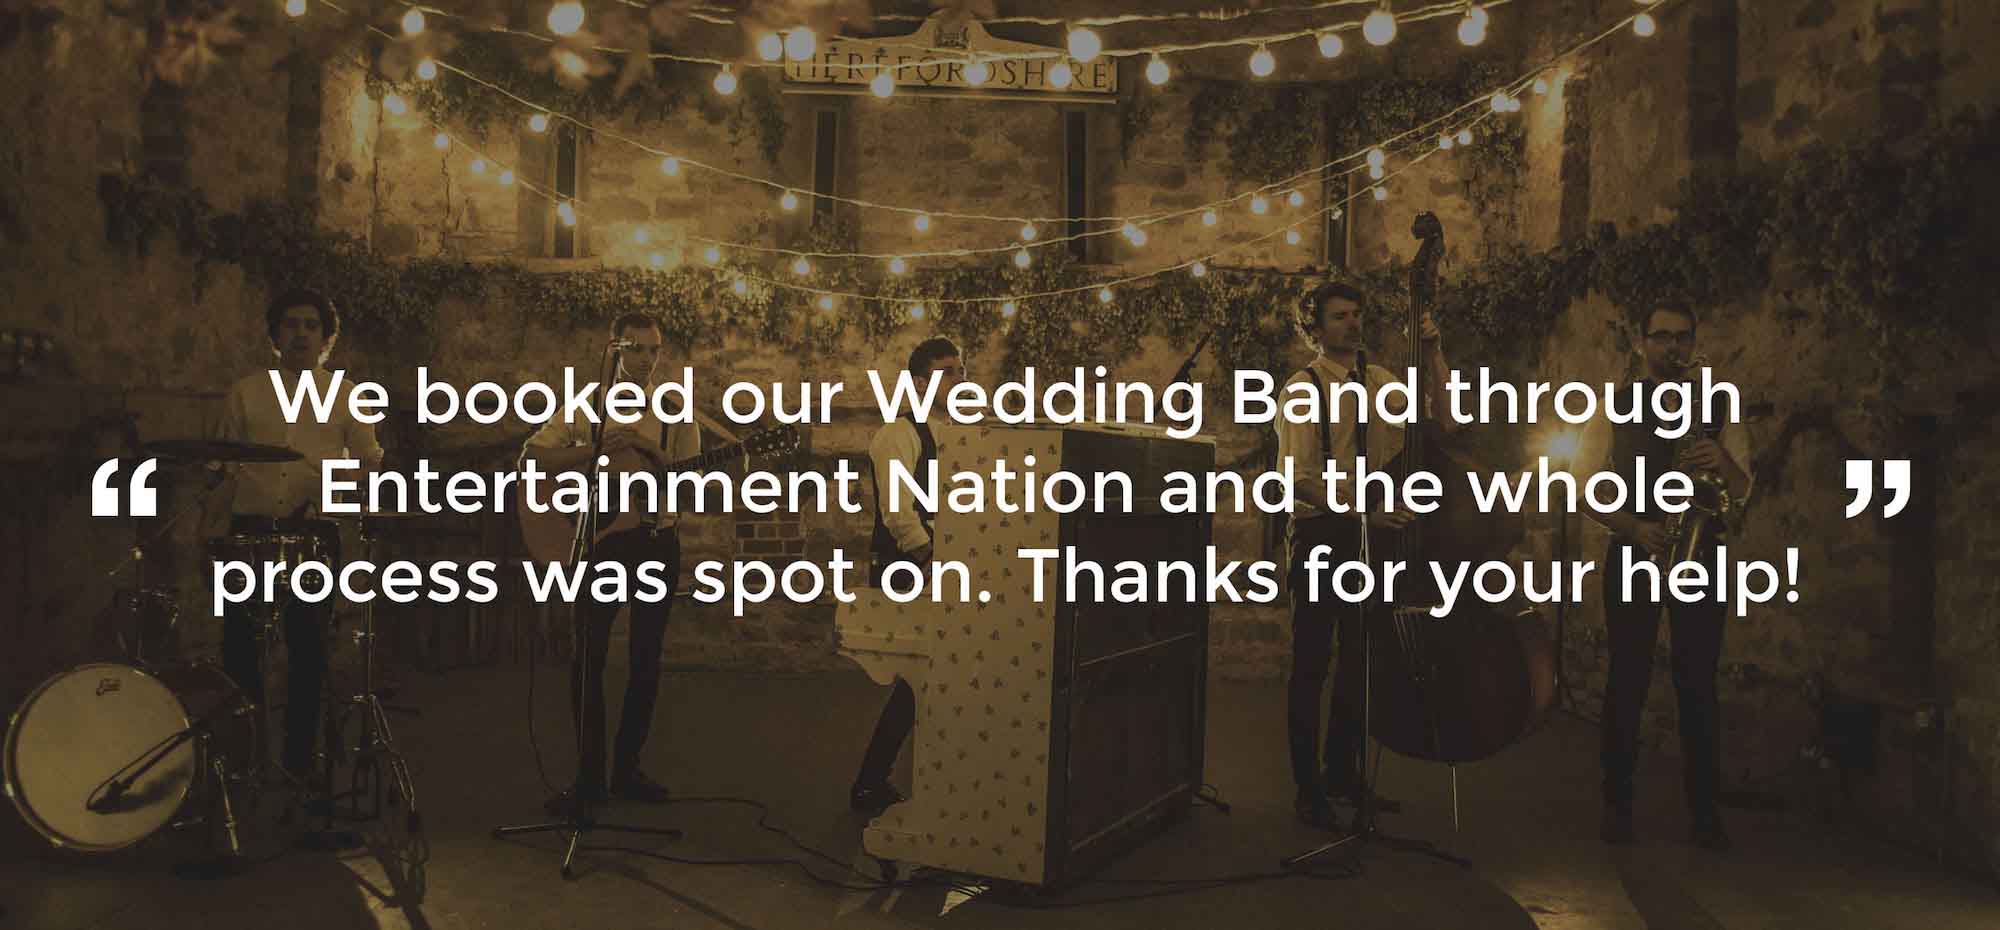 Client Review of a Wedding Band Somerset